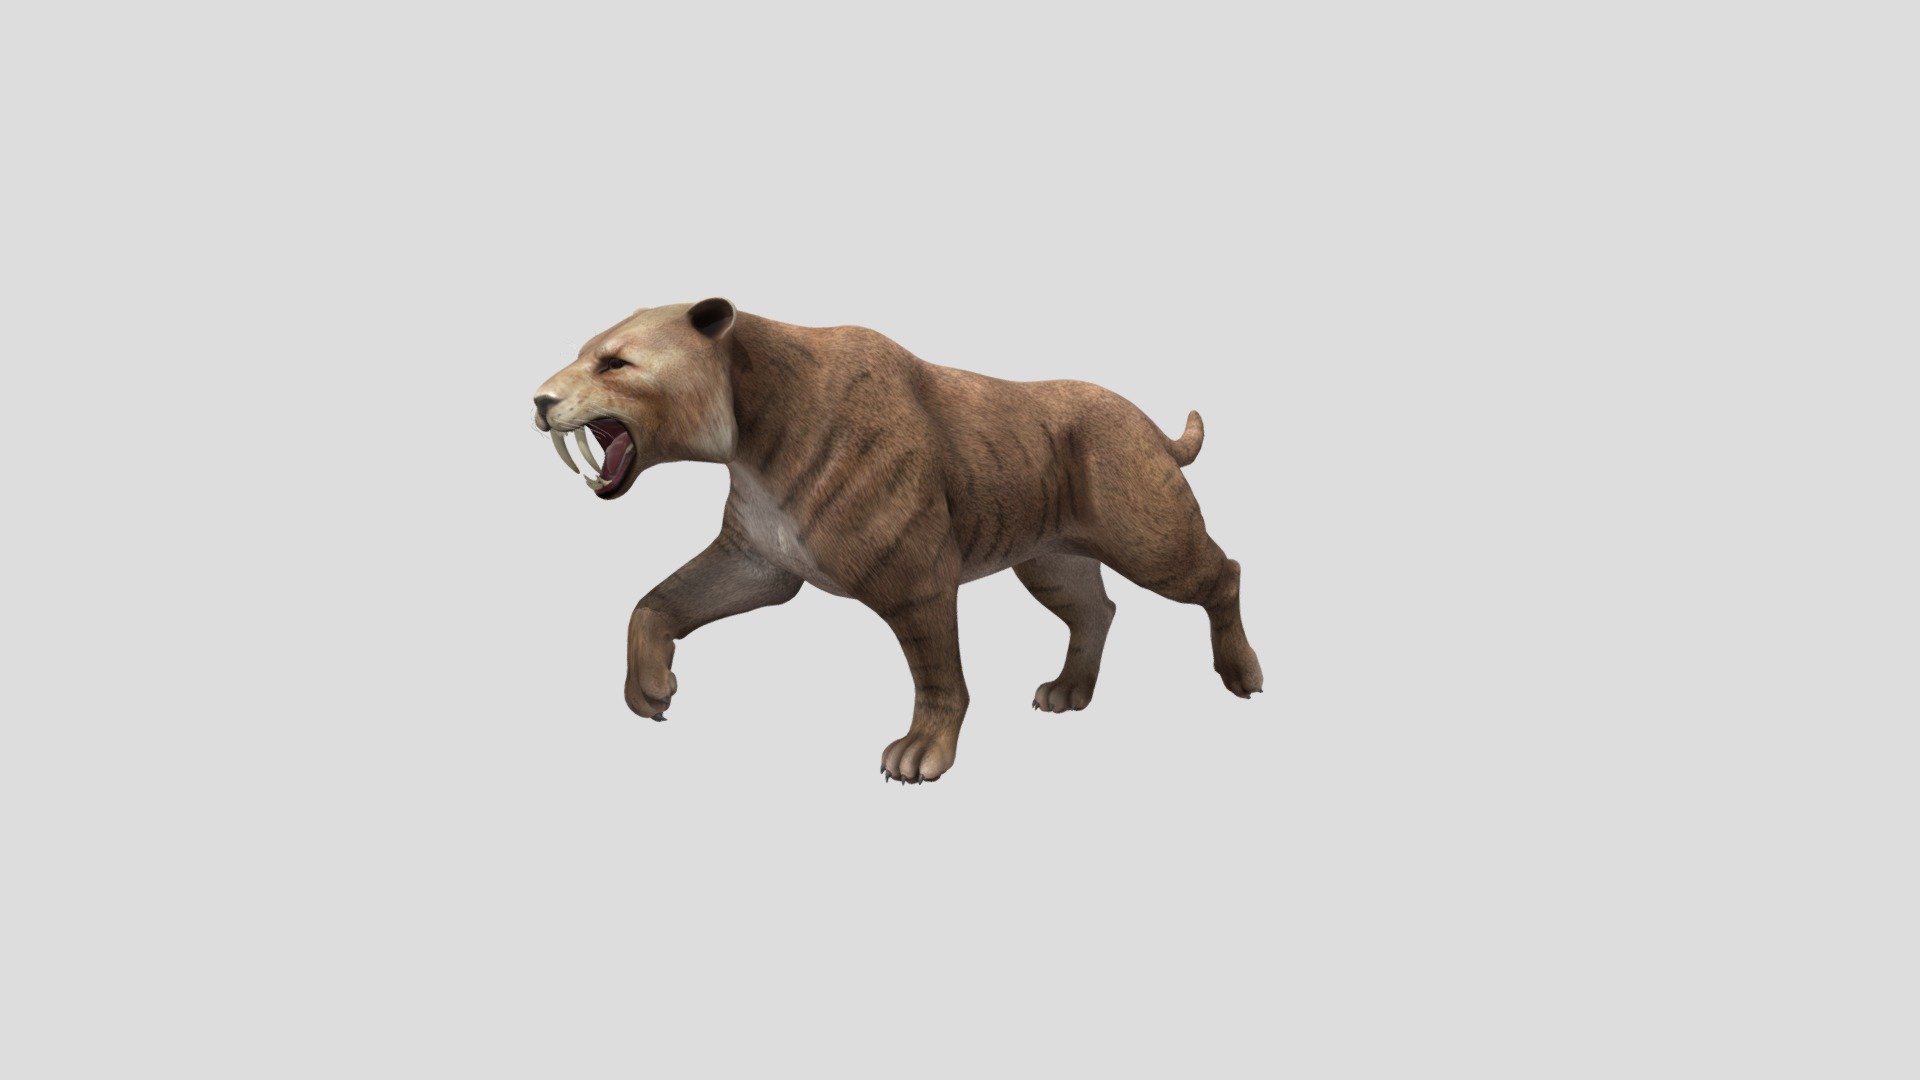 Saber-tooth tiger not rigged in ancient time
thanks for the correct name guys 3d model